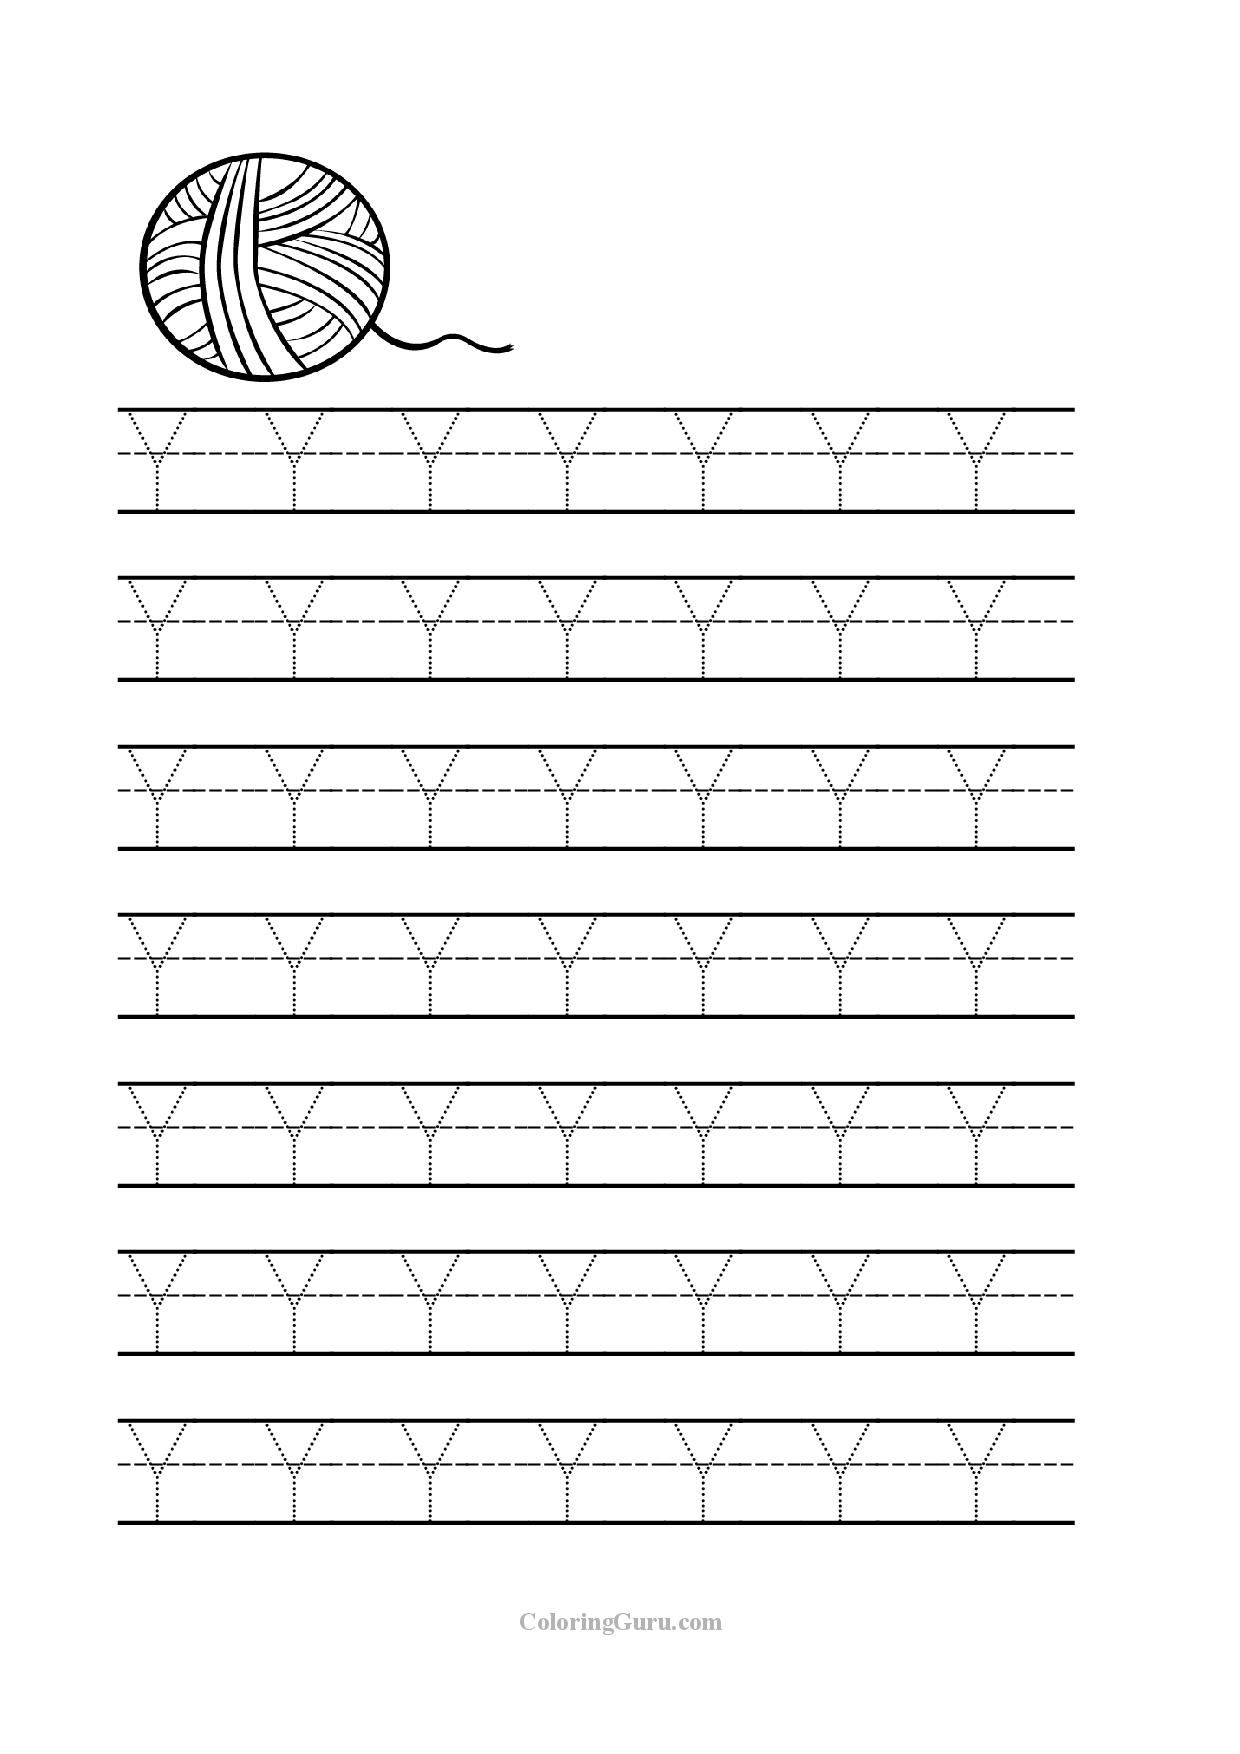 Free Printable Tracing Letter Y Worksheets For Preschool pertaining to Trace Letter Y Worksheets